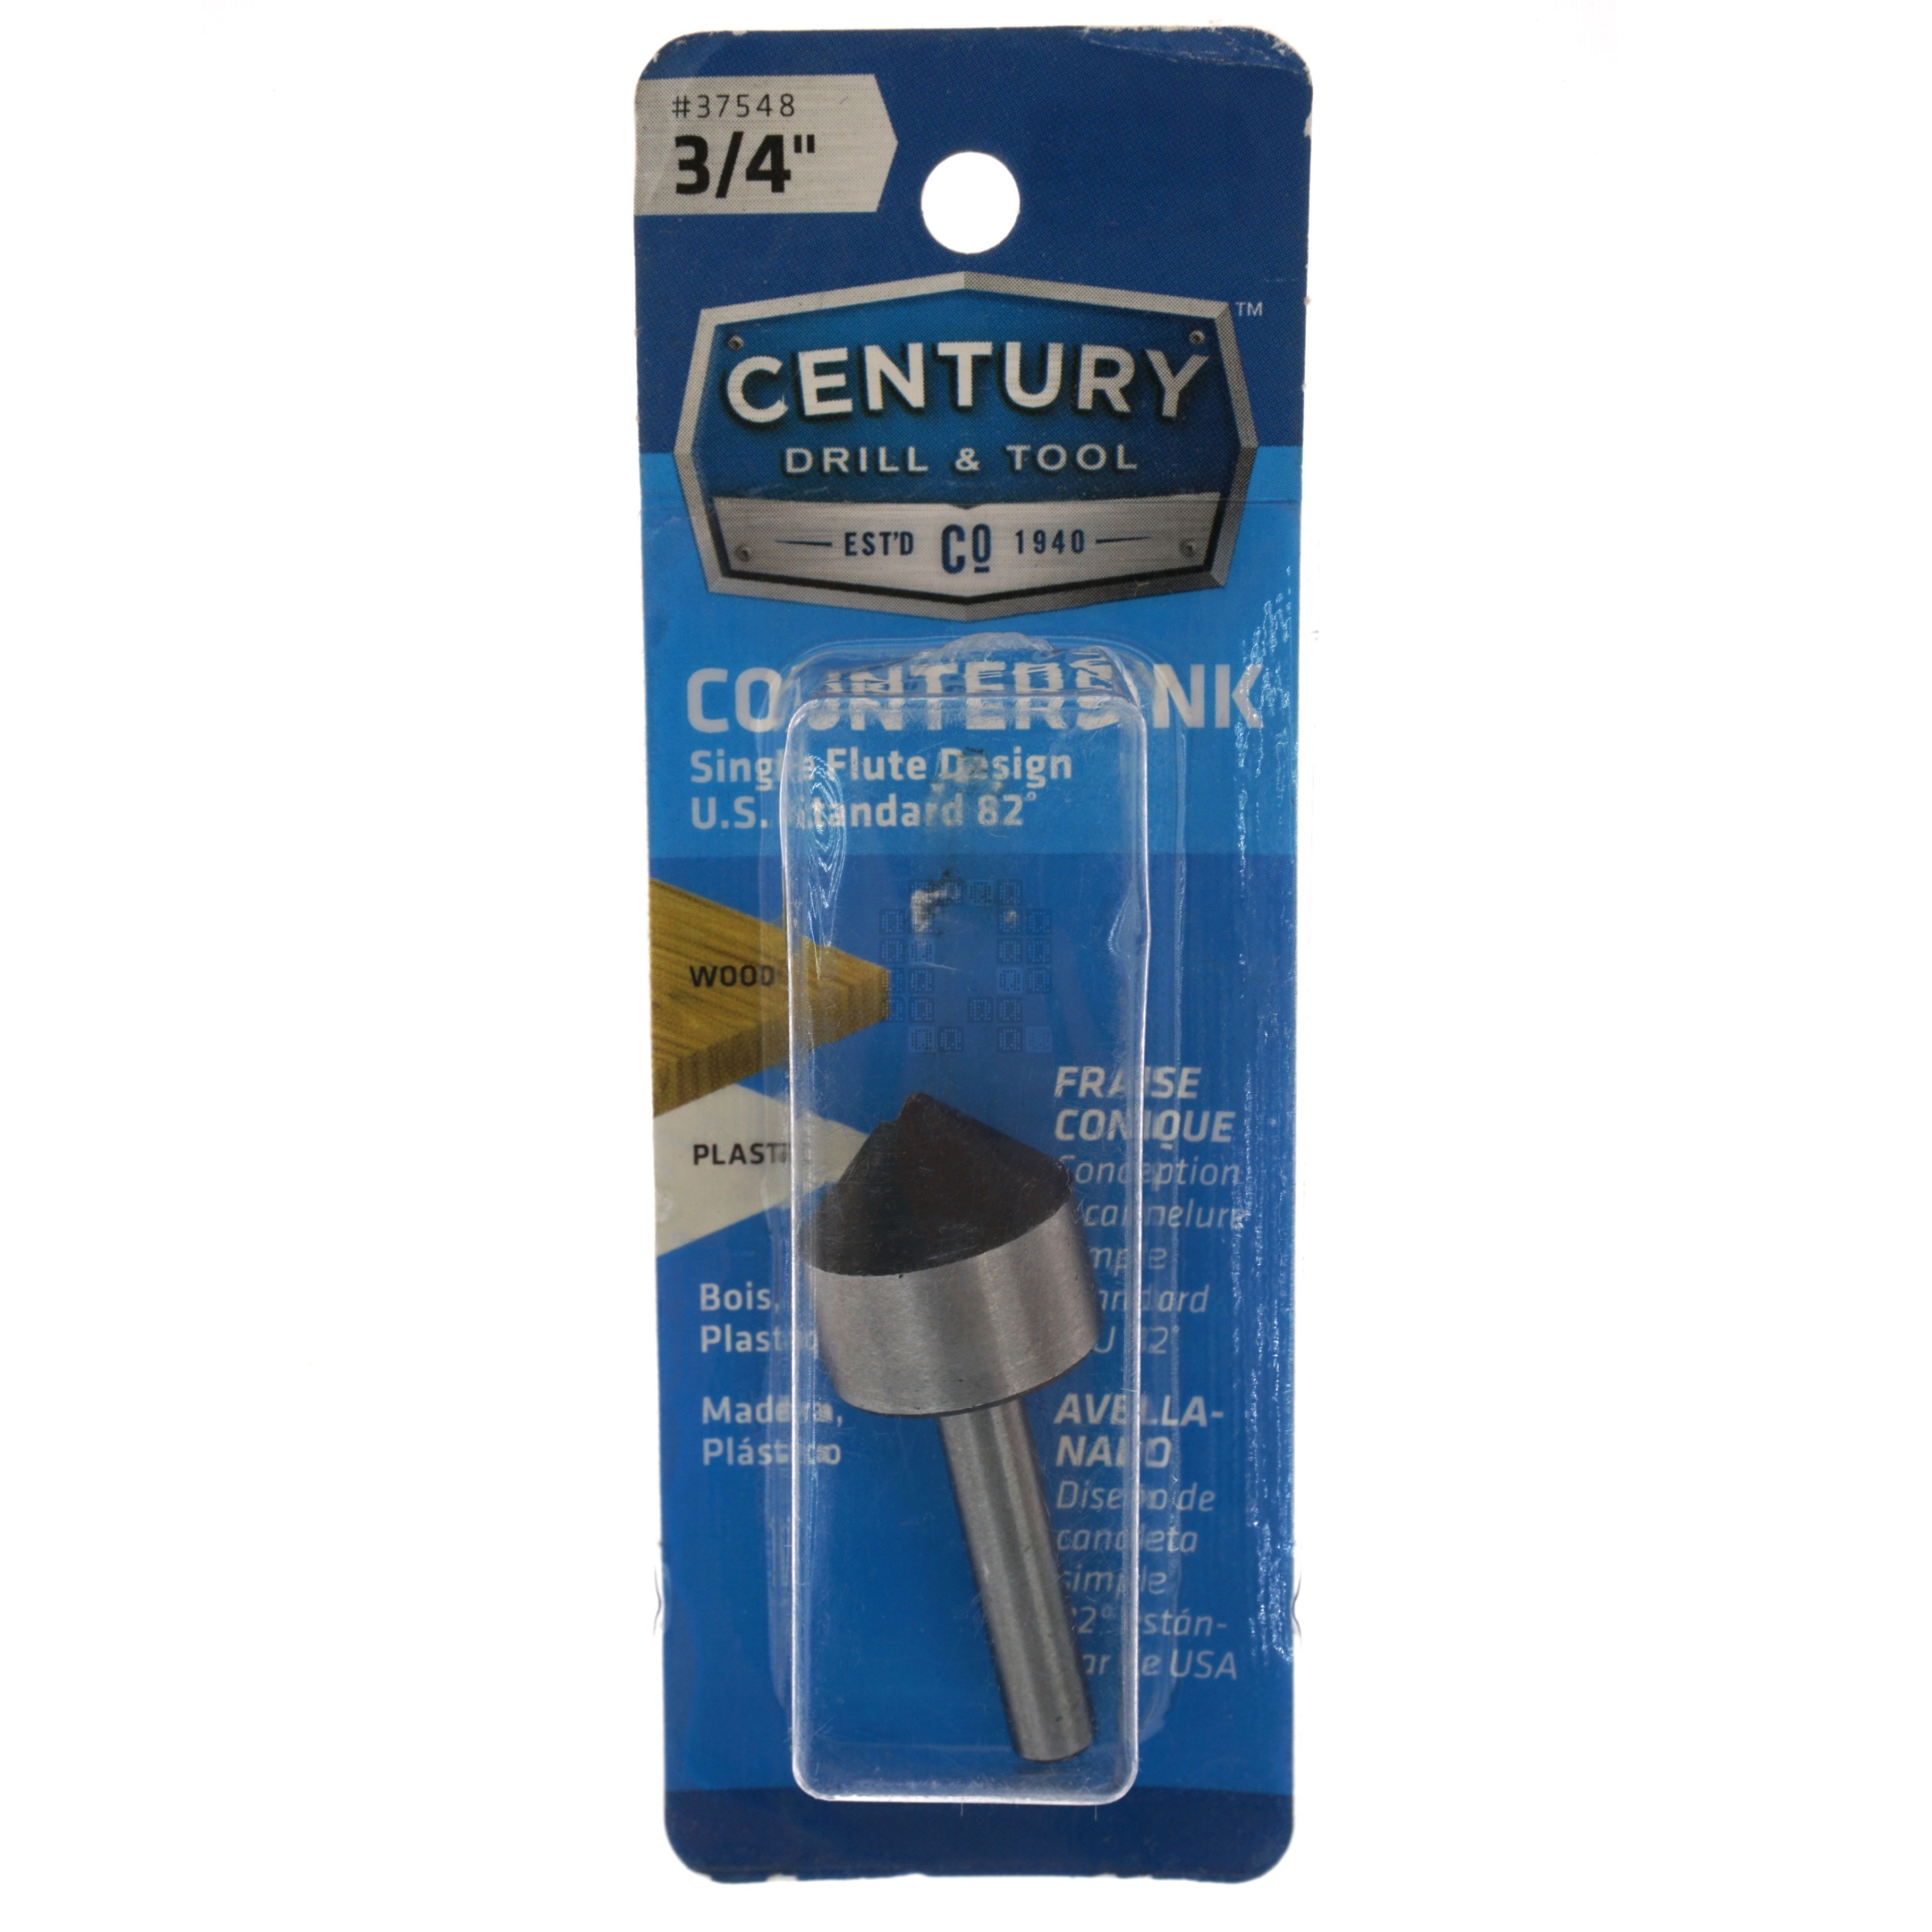 Century Drill & Tool 37548 3/4" Countersink, Single Flute 82°, Carbon Alloy